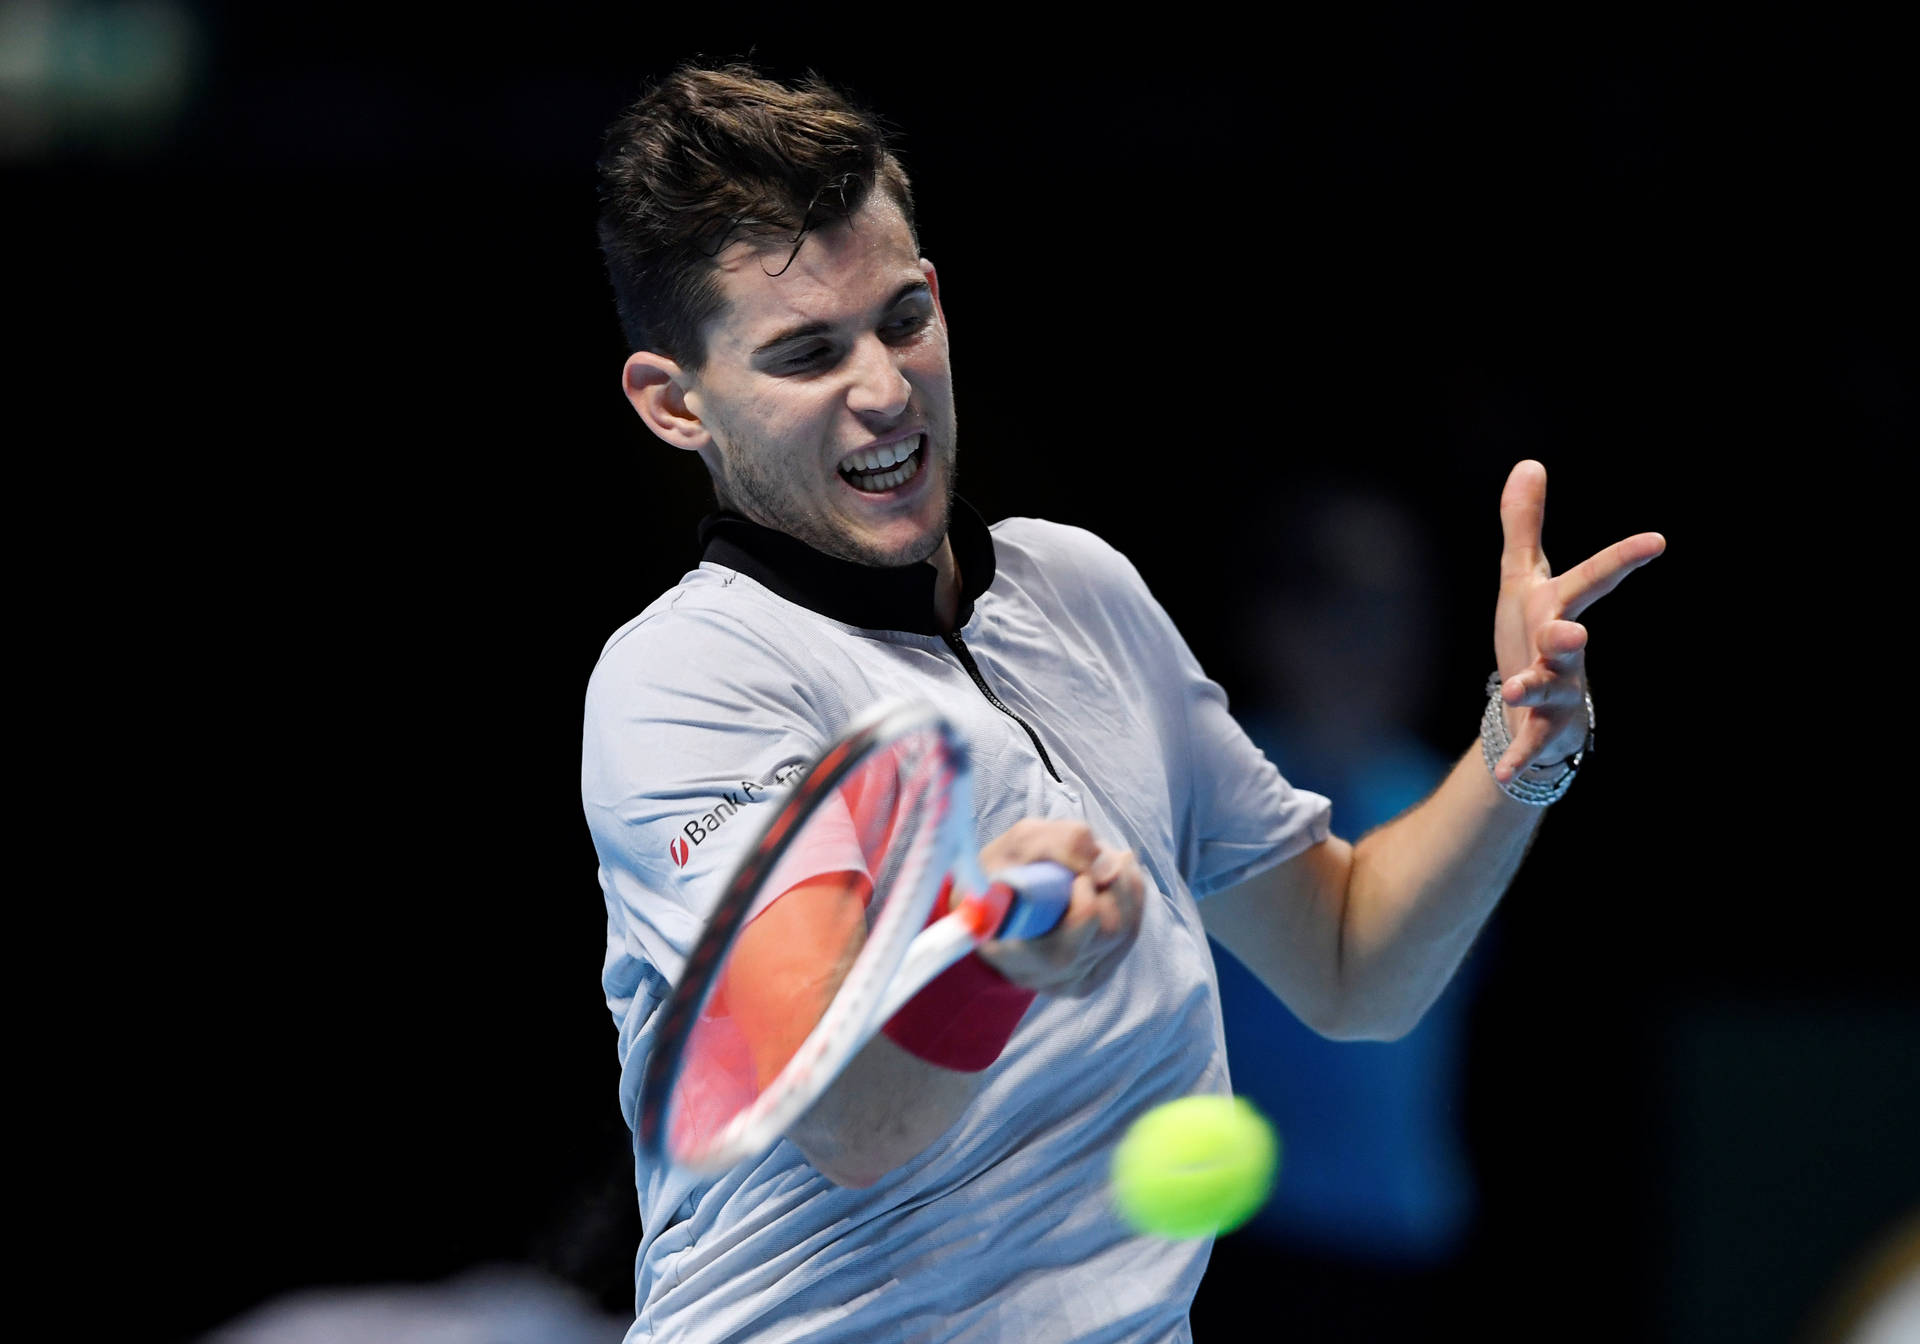 Professional Tennis Player Dominic Thiem In Action Background